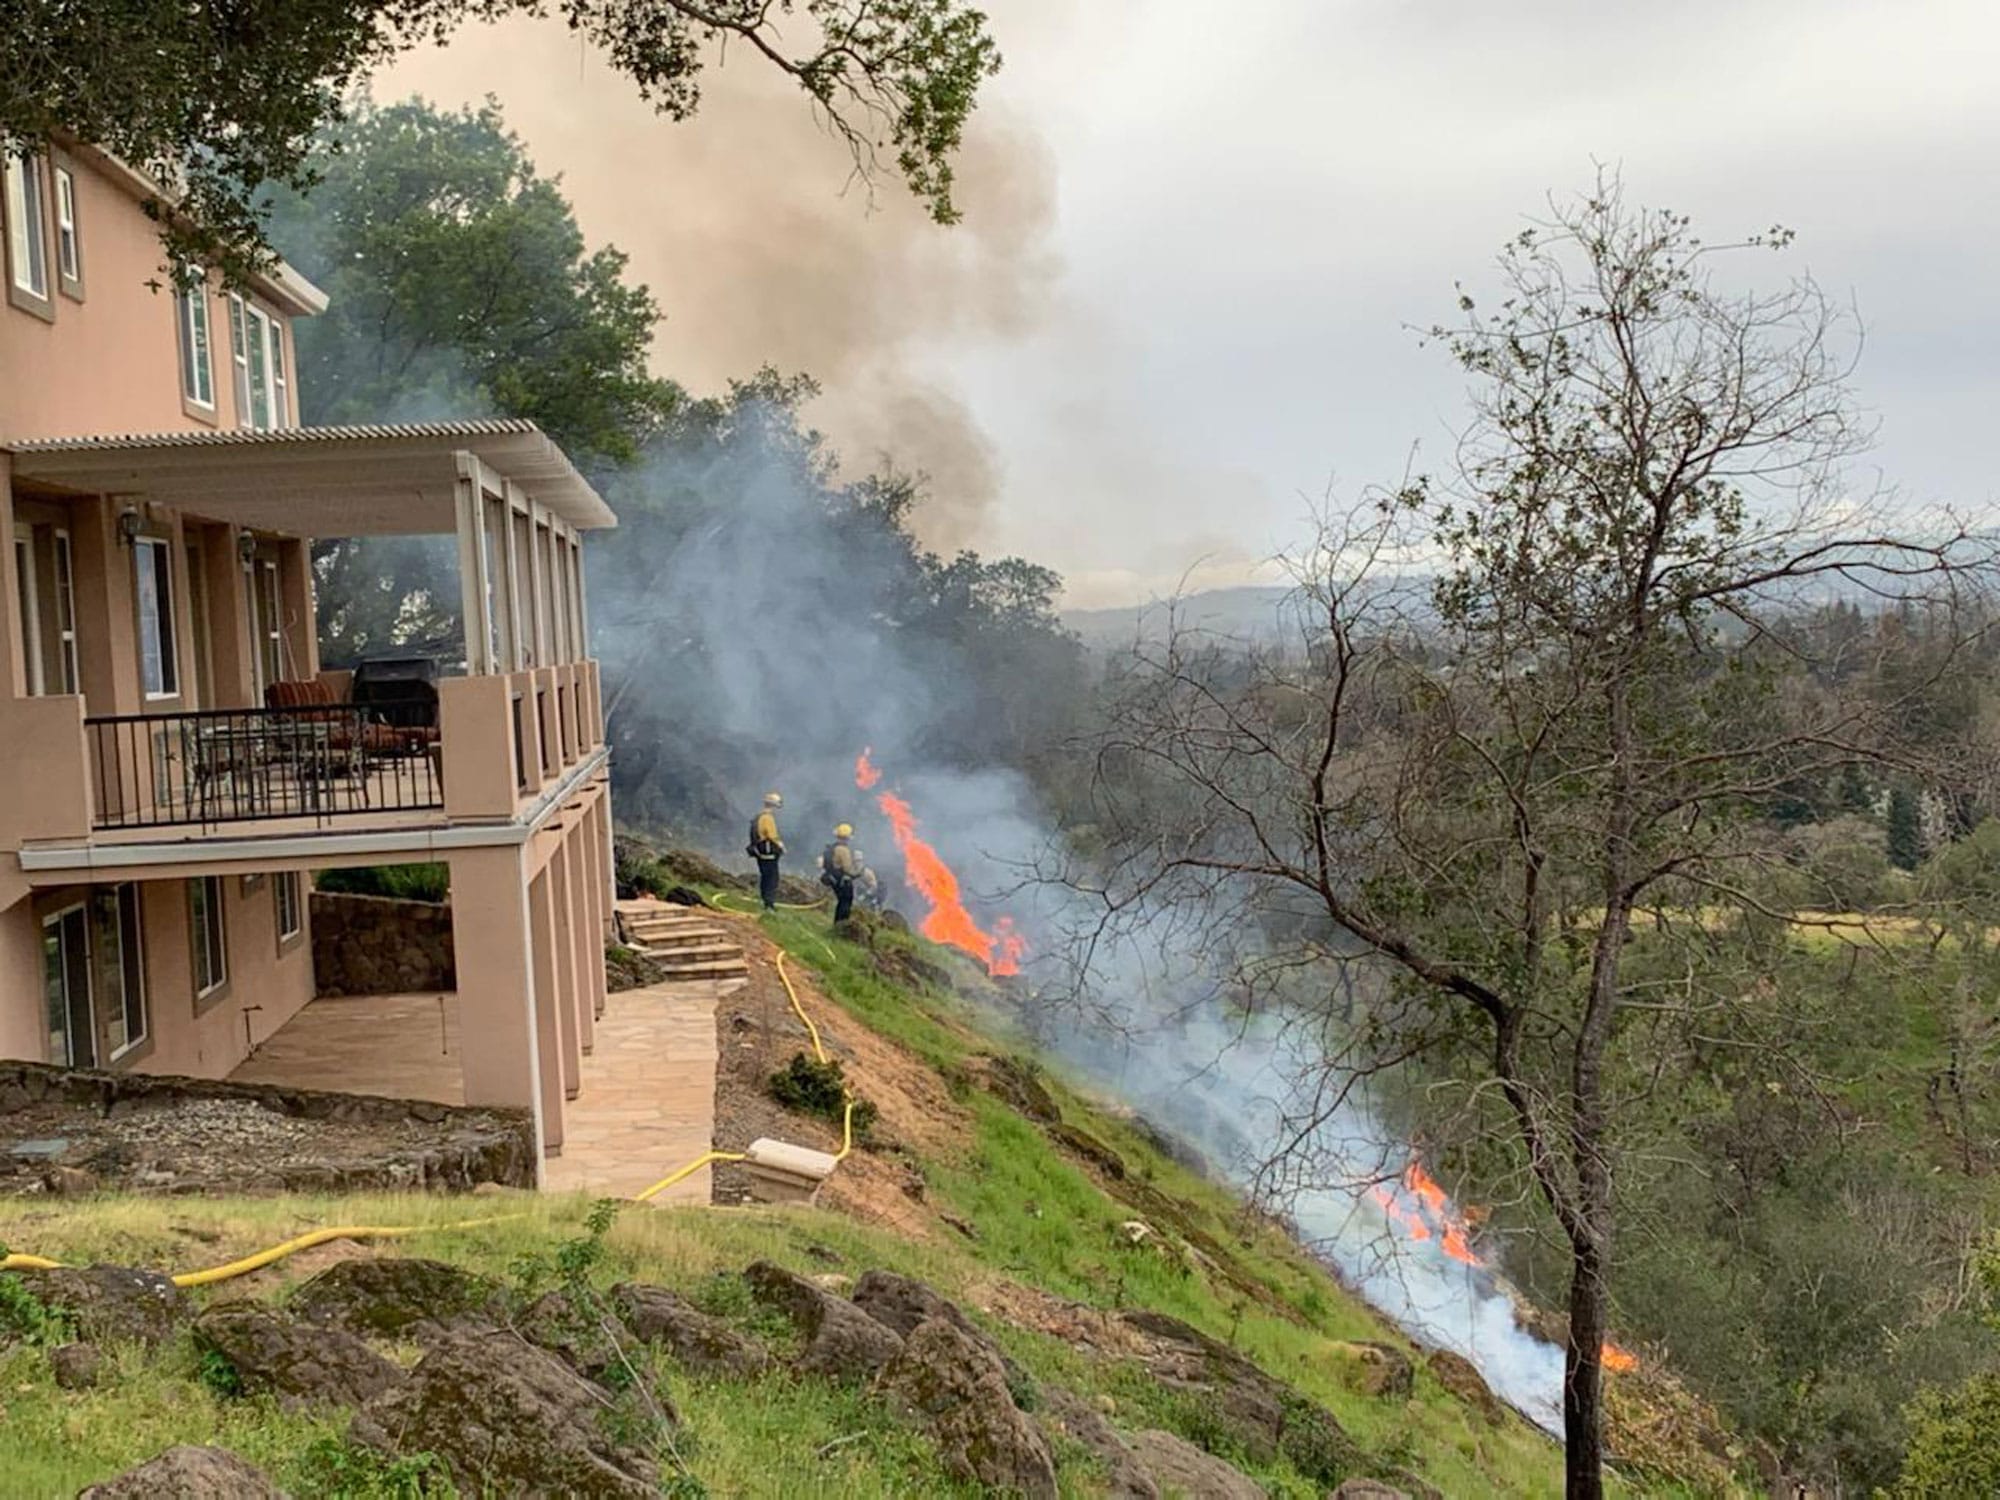 Controlled fires on steep inclines leading to a house